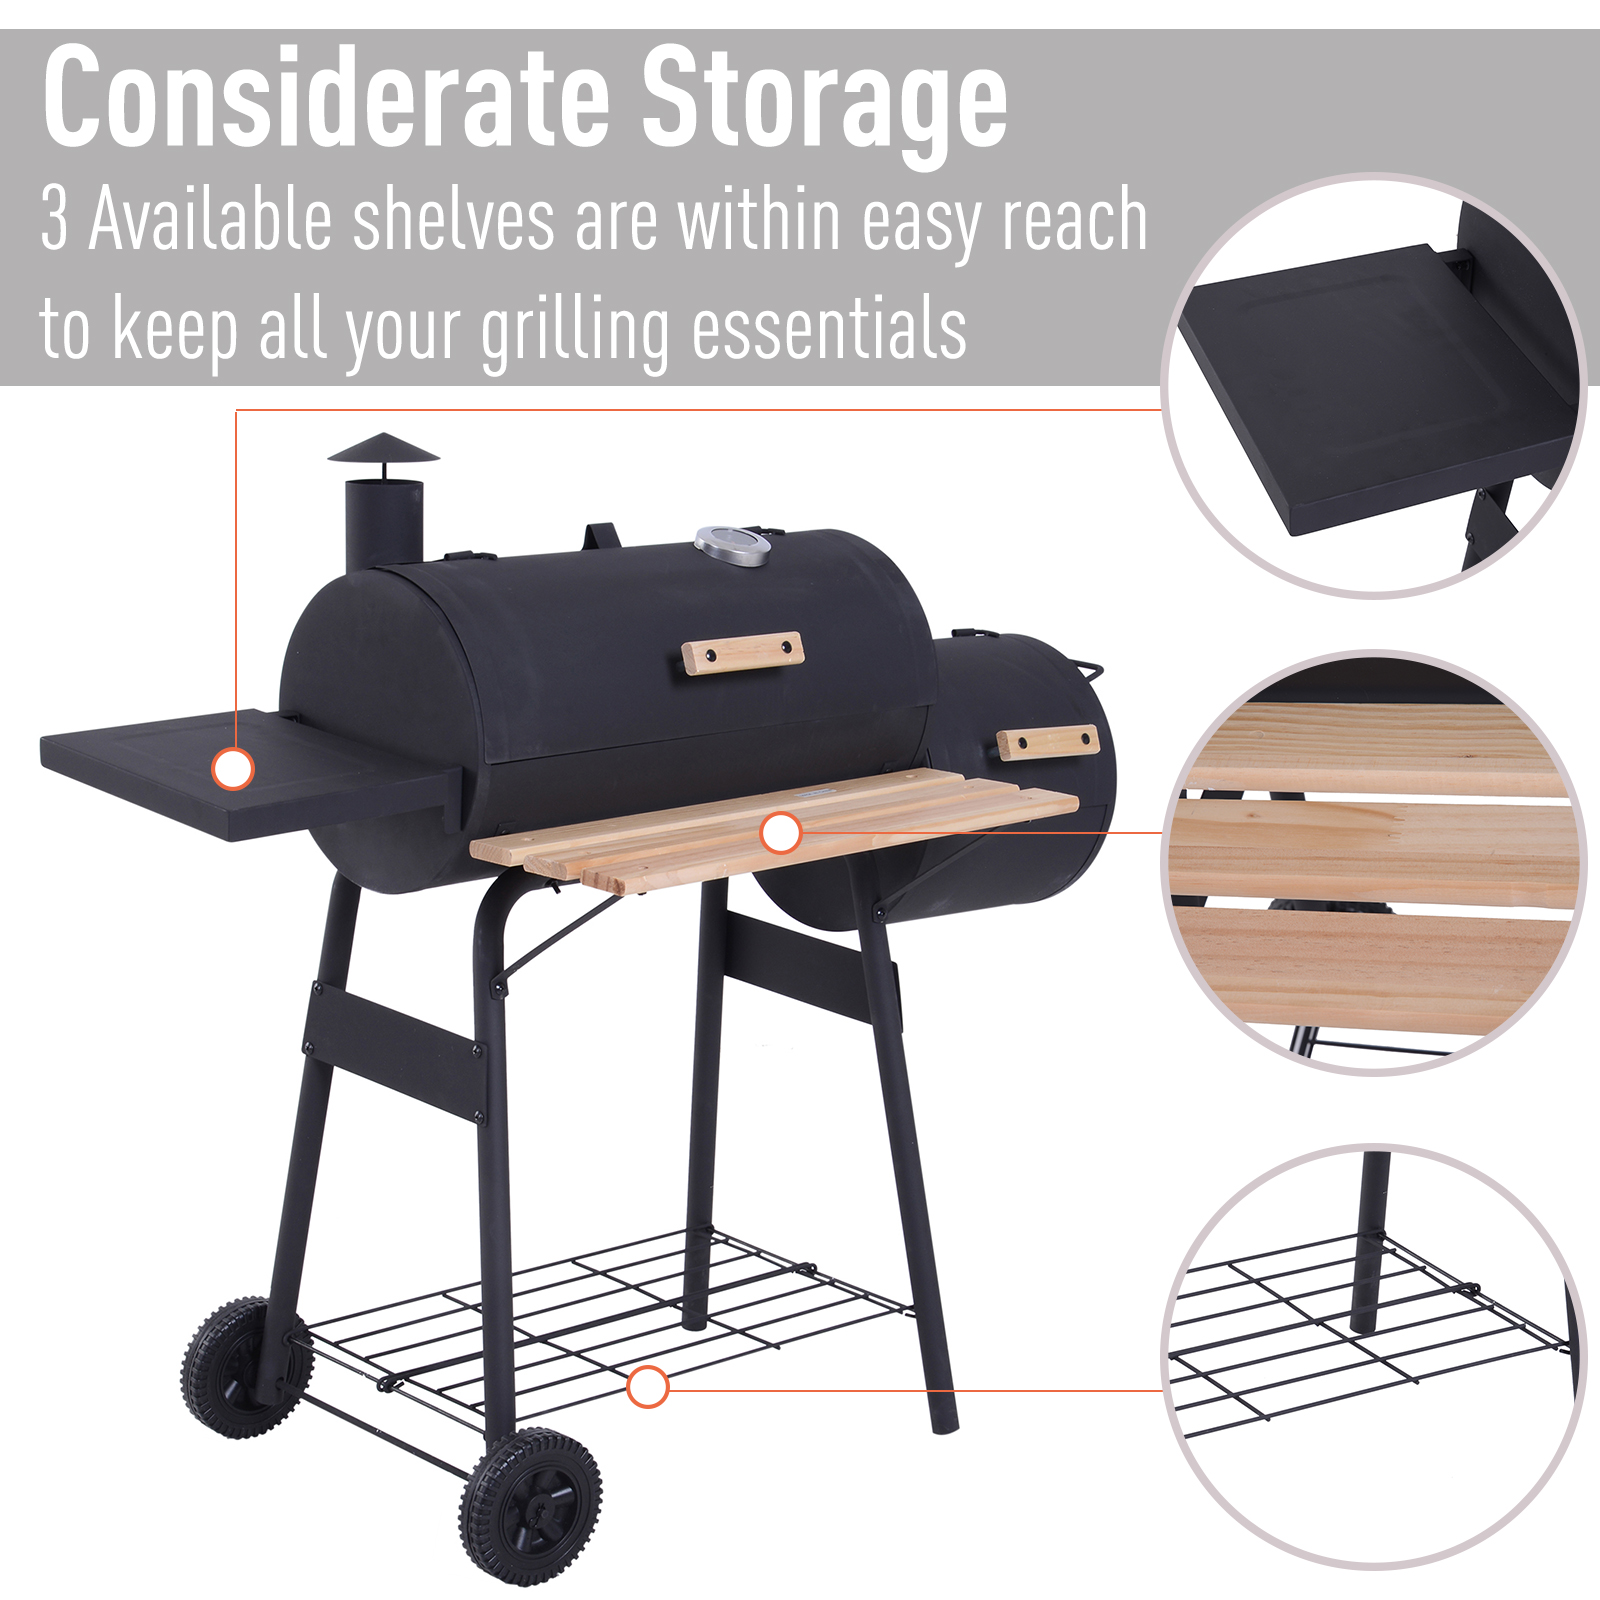 Outsunny 48" Steel Portable Backyard Charcoal BBQ Grill and Offset Smoker Combo - image 3 of 9